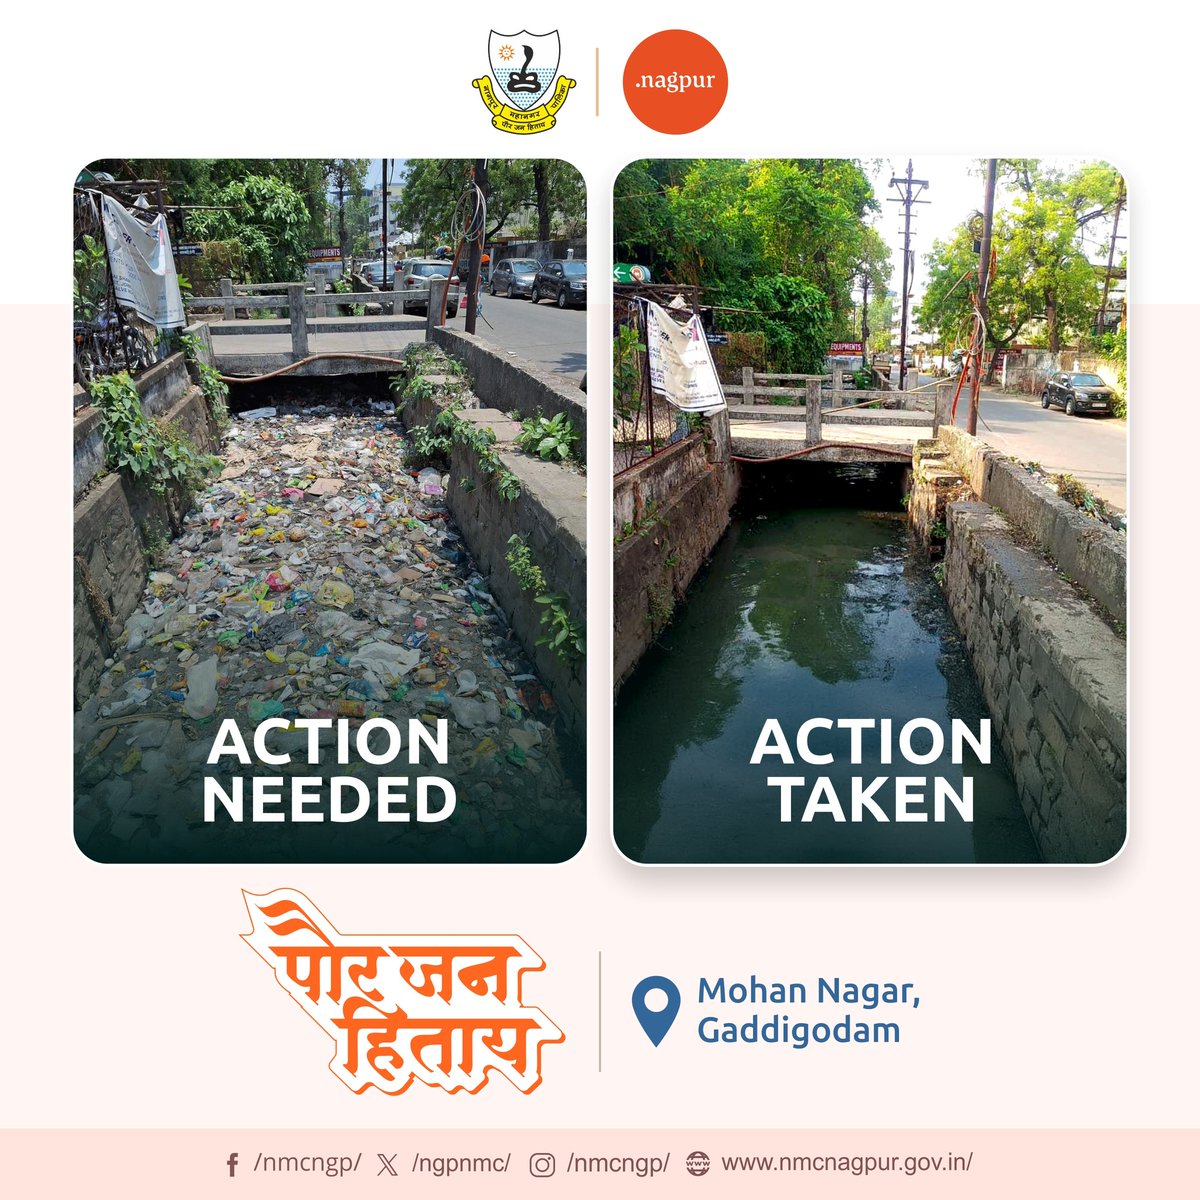 Ensuring citizen satisfaction remains a top priority for Nagpur Municipal Corporation. We've taken swift and responsible steps to address concerns raised by our residents.
ULB Code - 802710

#nmc #nagpur #nagpurcity #SwachhSurvekshan2024 #SwachhataKeCharRang #MyCityMyPride